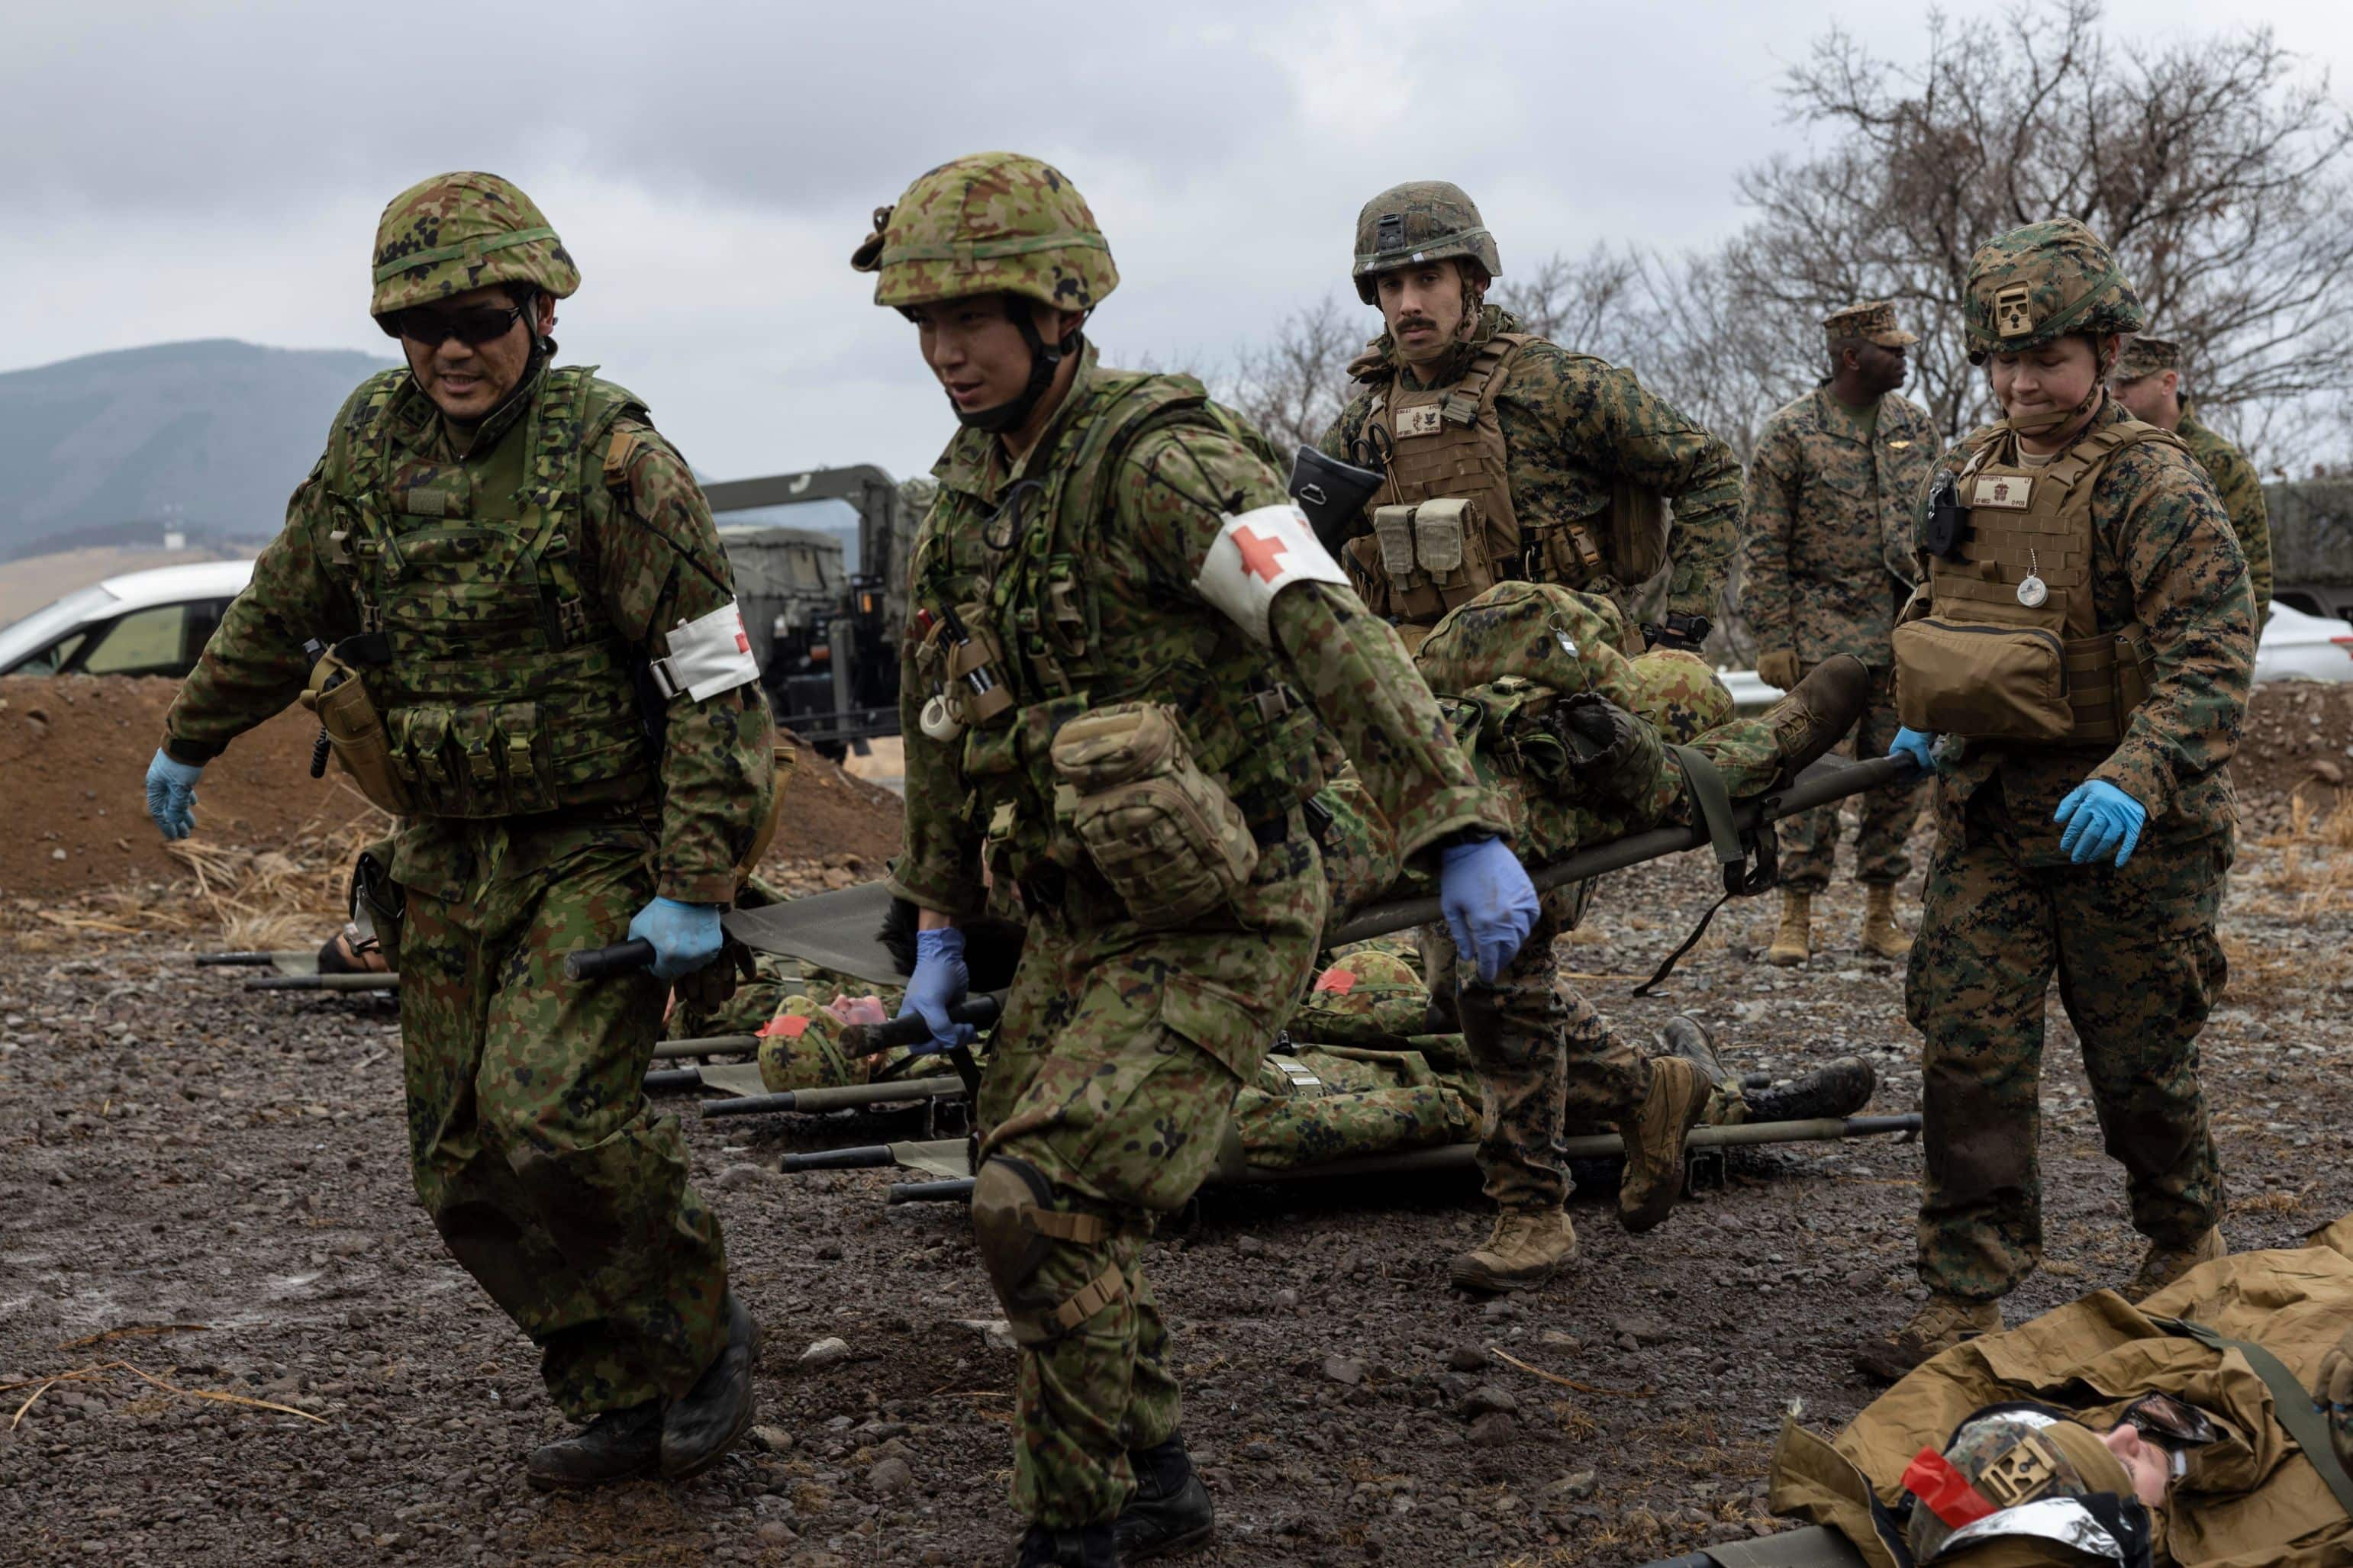 U.S. Navy corpsmen with the 31st Marine Expeditionary Unit, and soldiers with the 1st Amphibious Rapid Deployment Regiment, Japan Ground Self-Defense Force, carry a simulated casualty on a stretcher during a mass casualty exercise at Hijudai, Japan